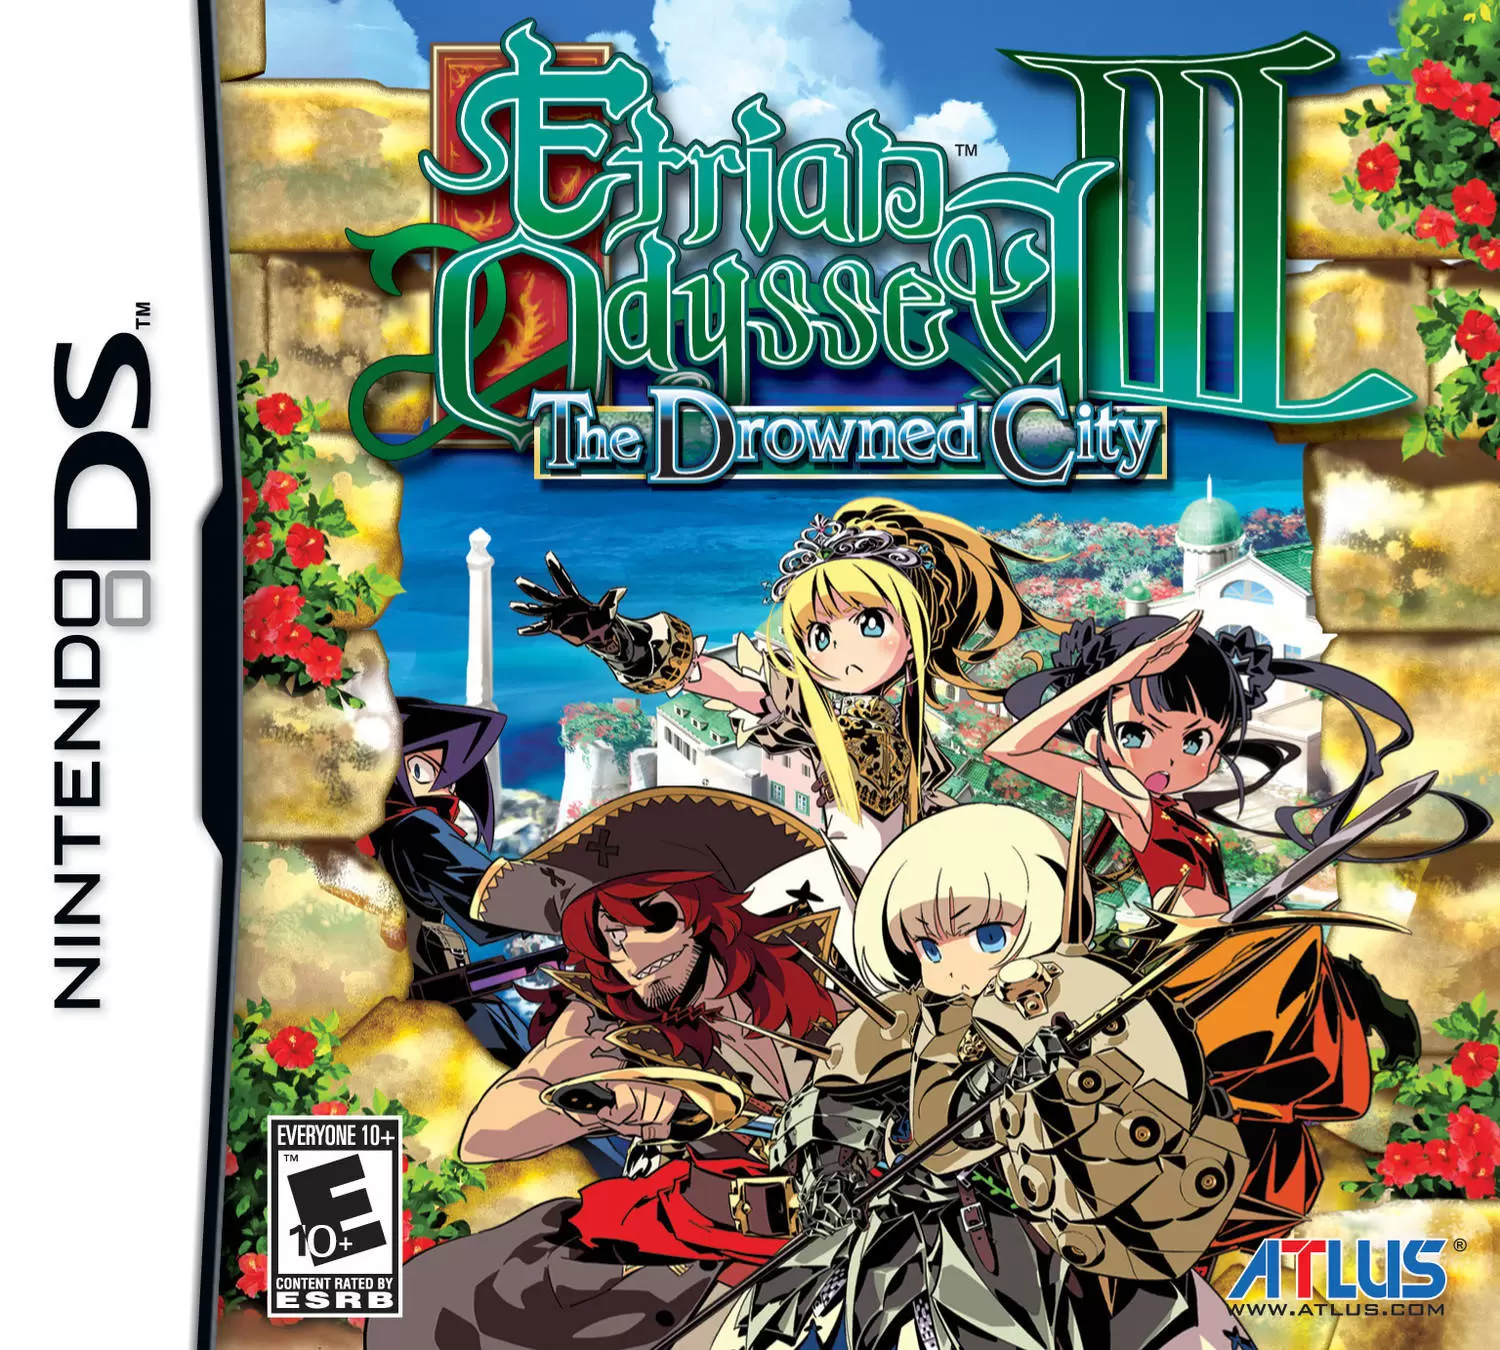 Nintendo DS Games - Etrian Odyssey III: The Drowned City